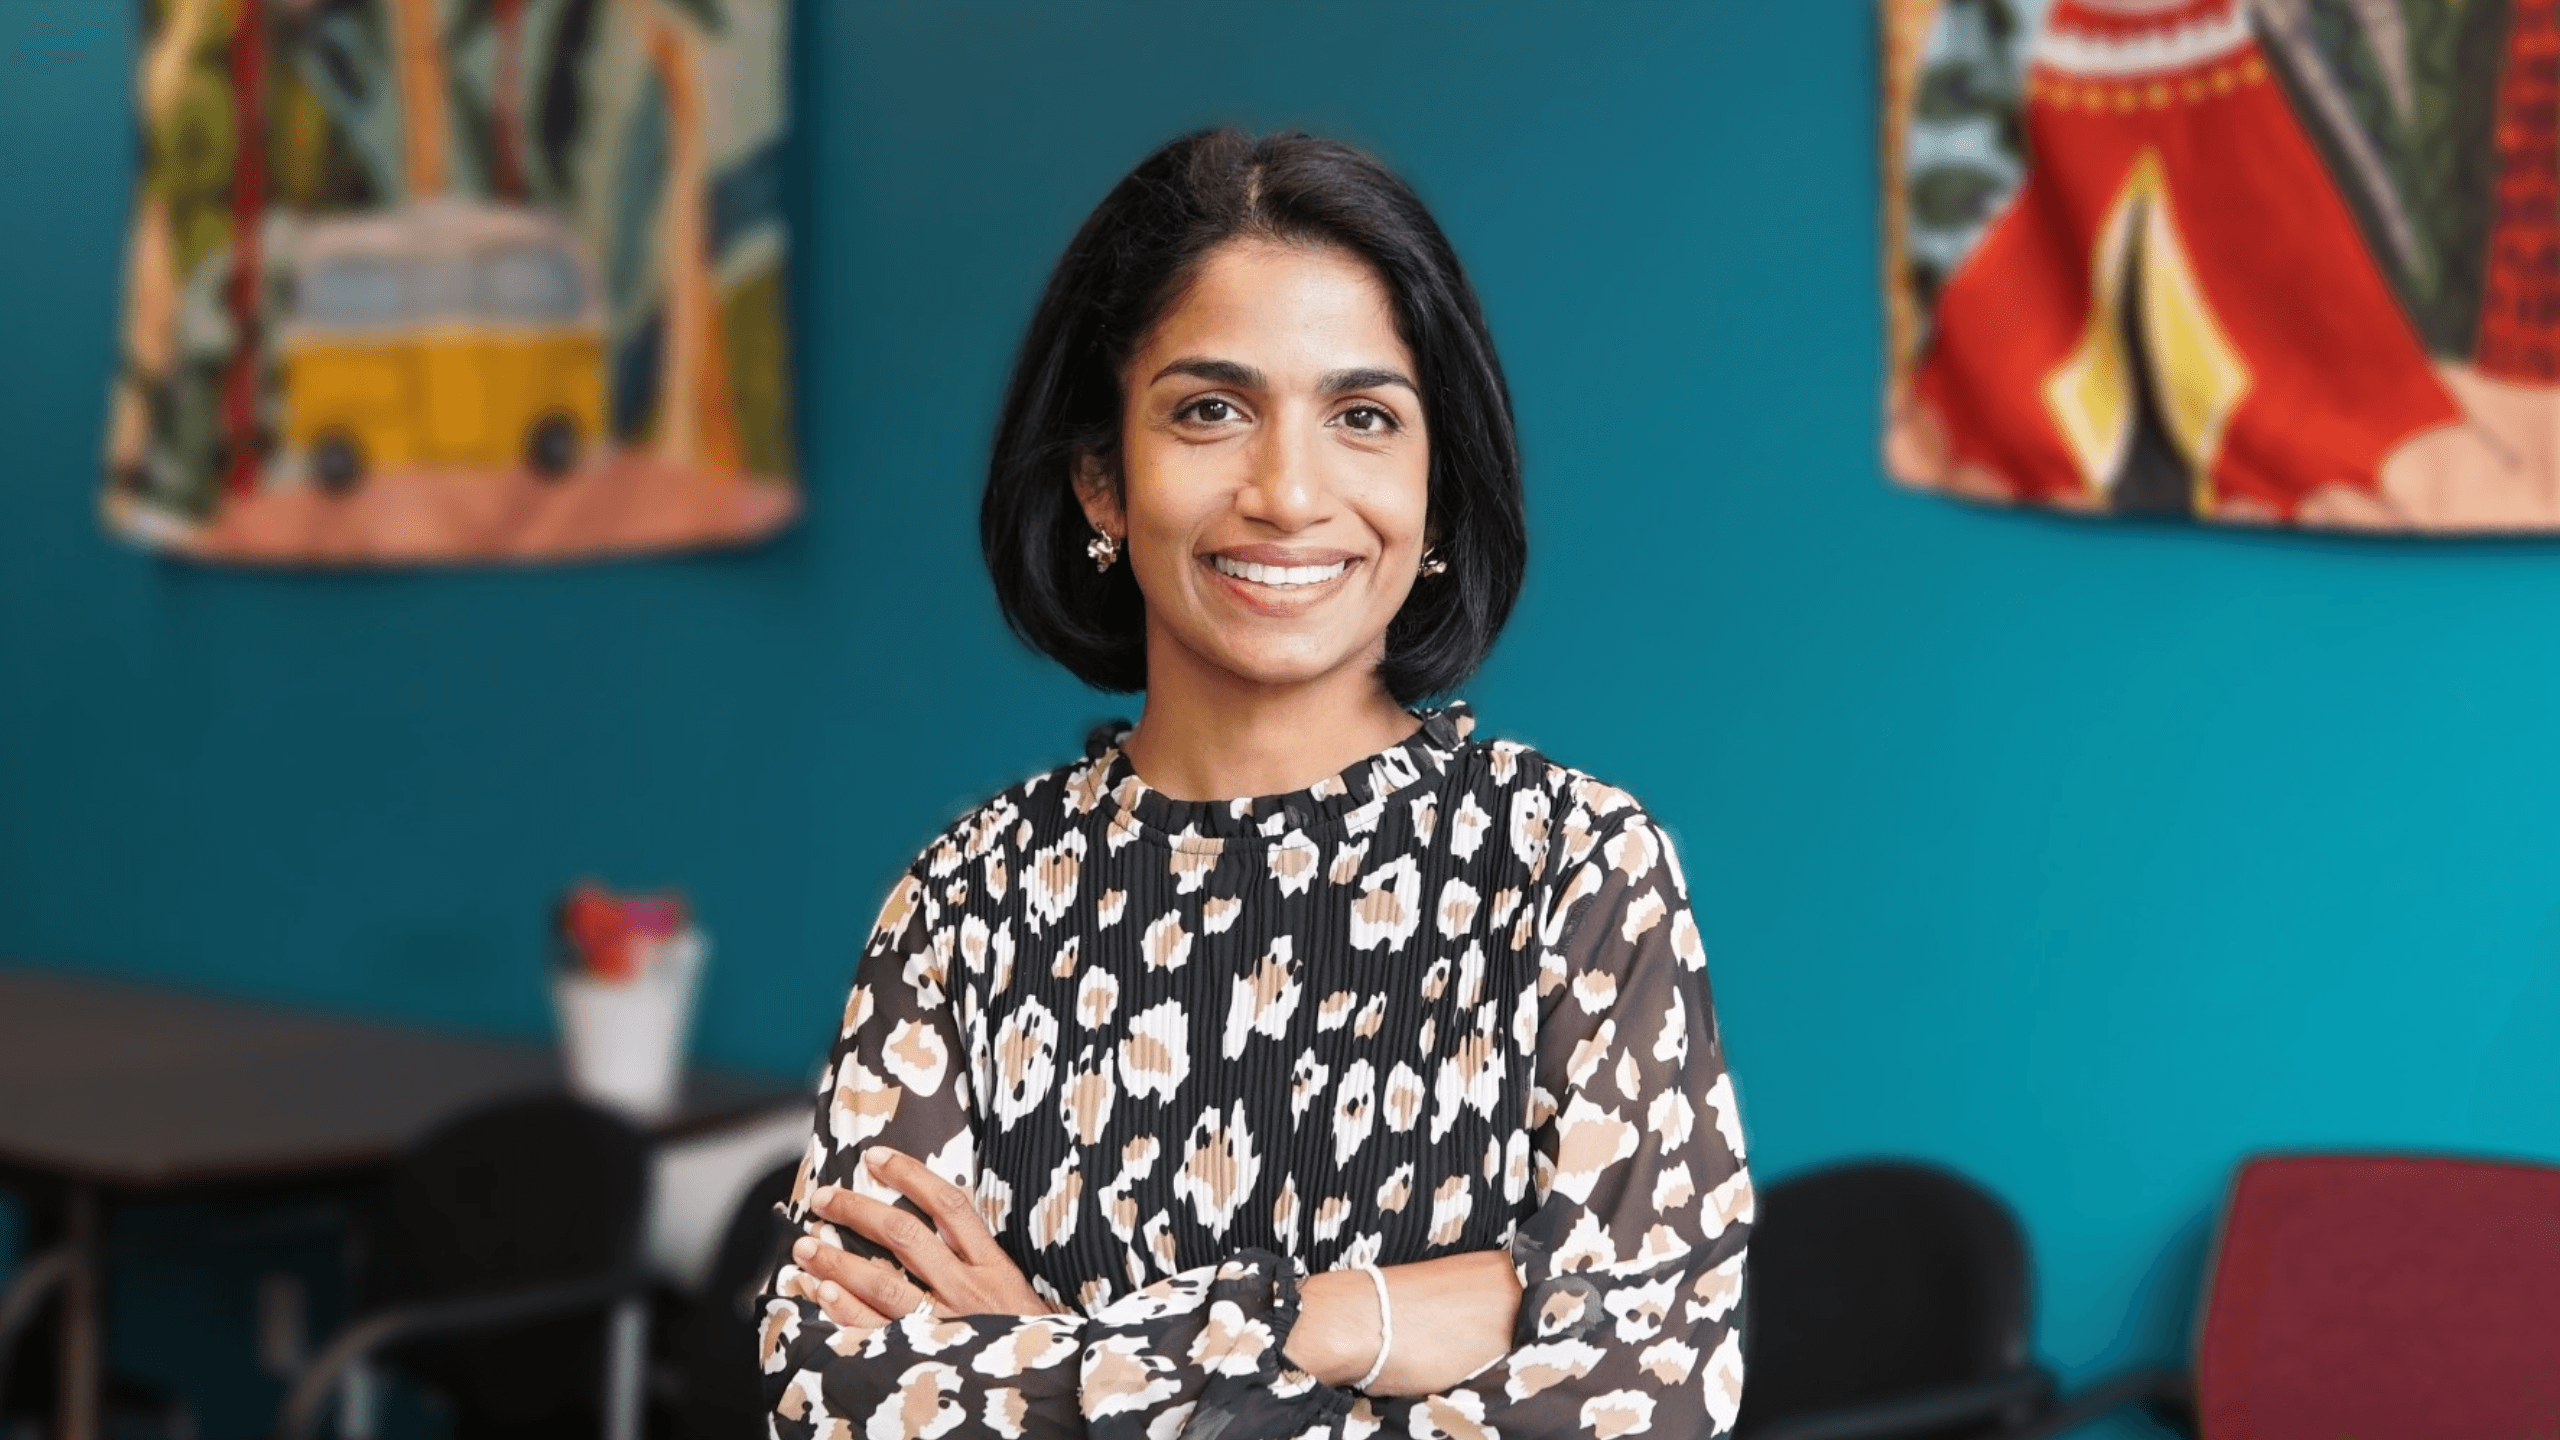 Maheshi Wadasinghe | Learning Experience Lead